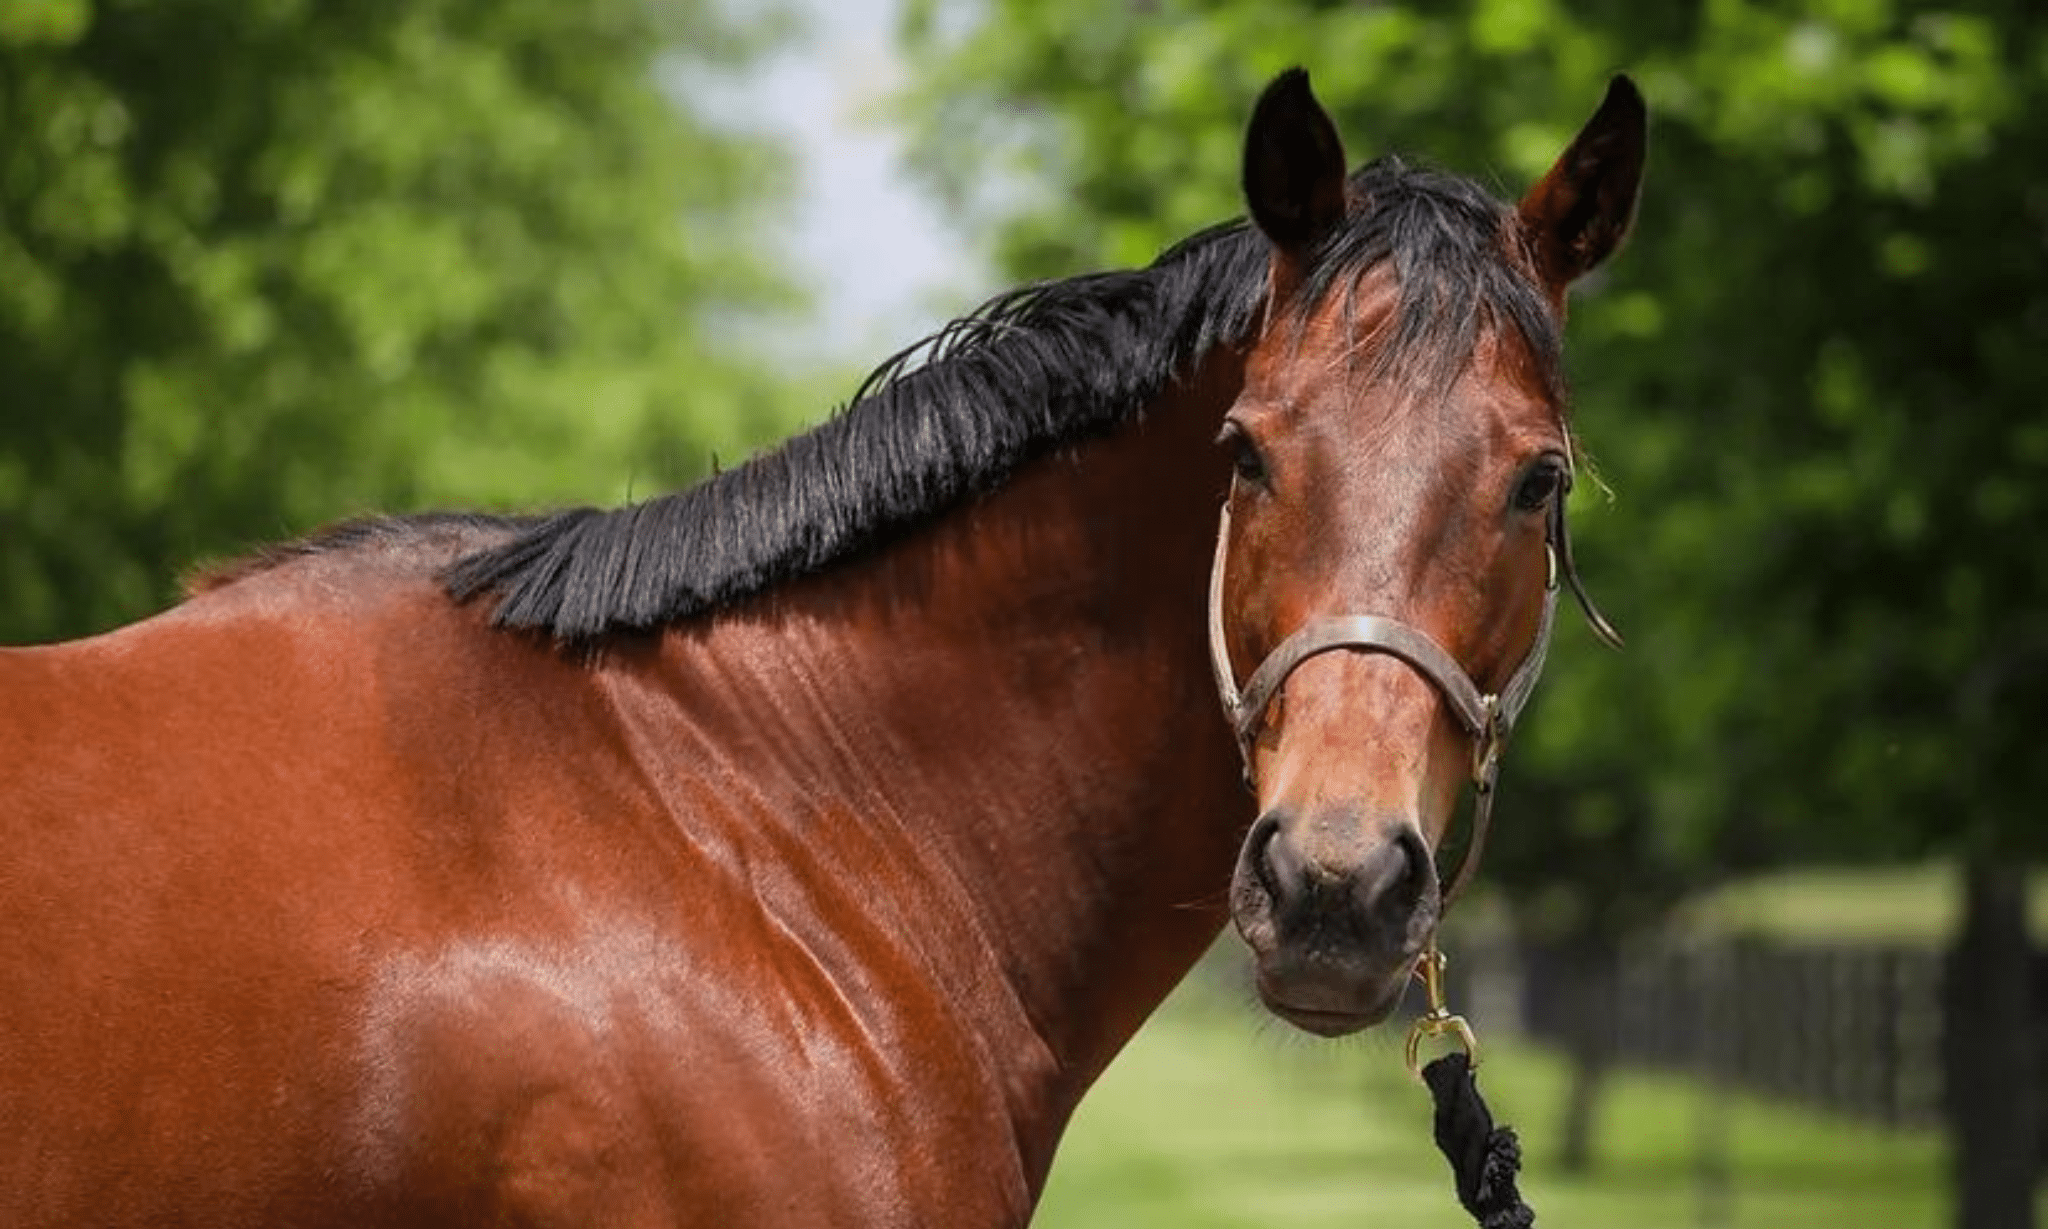 Meet the September Adoptable Horse of the Month